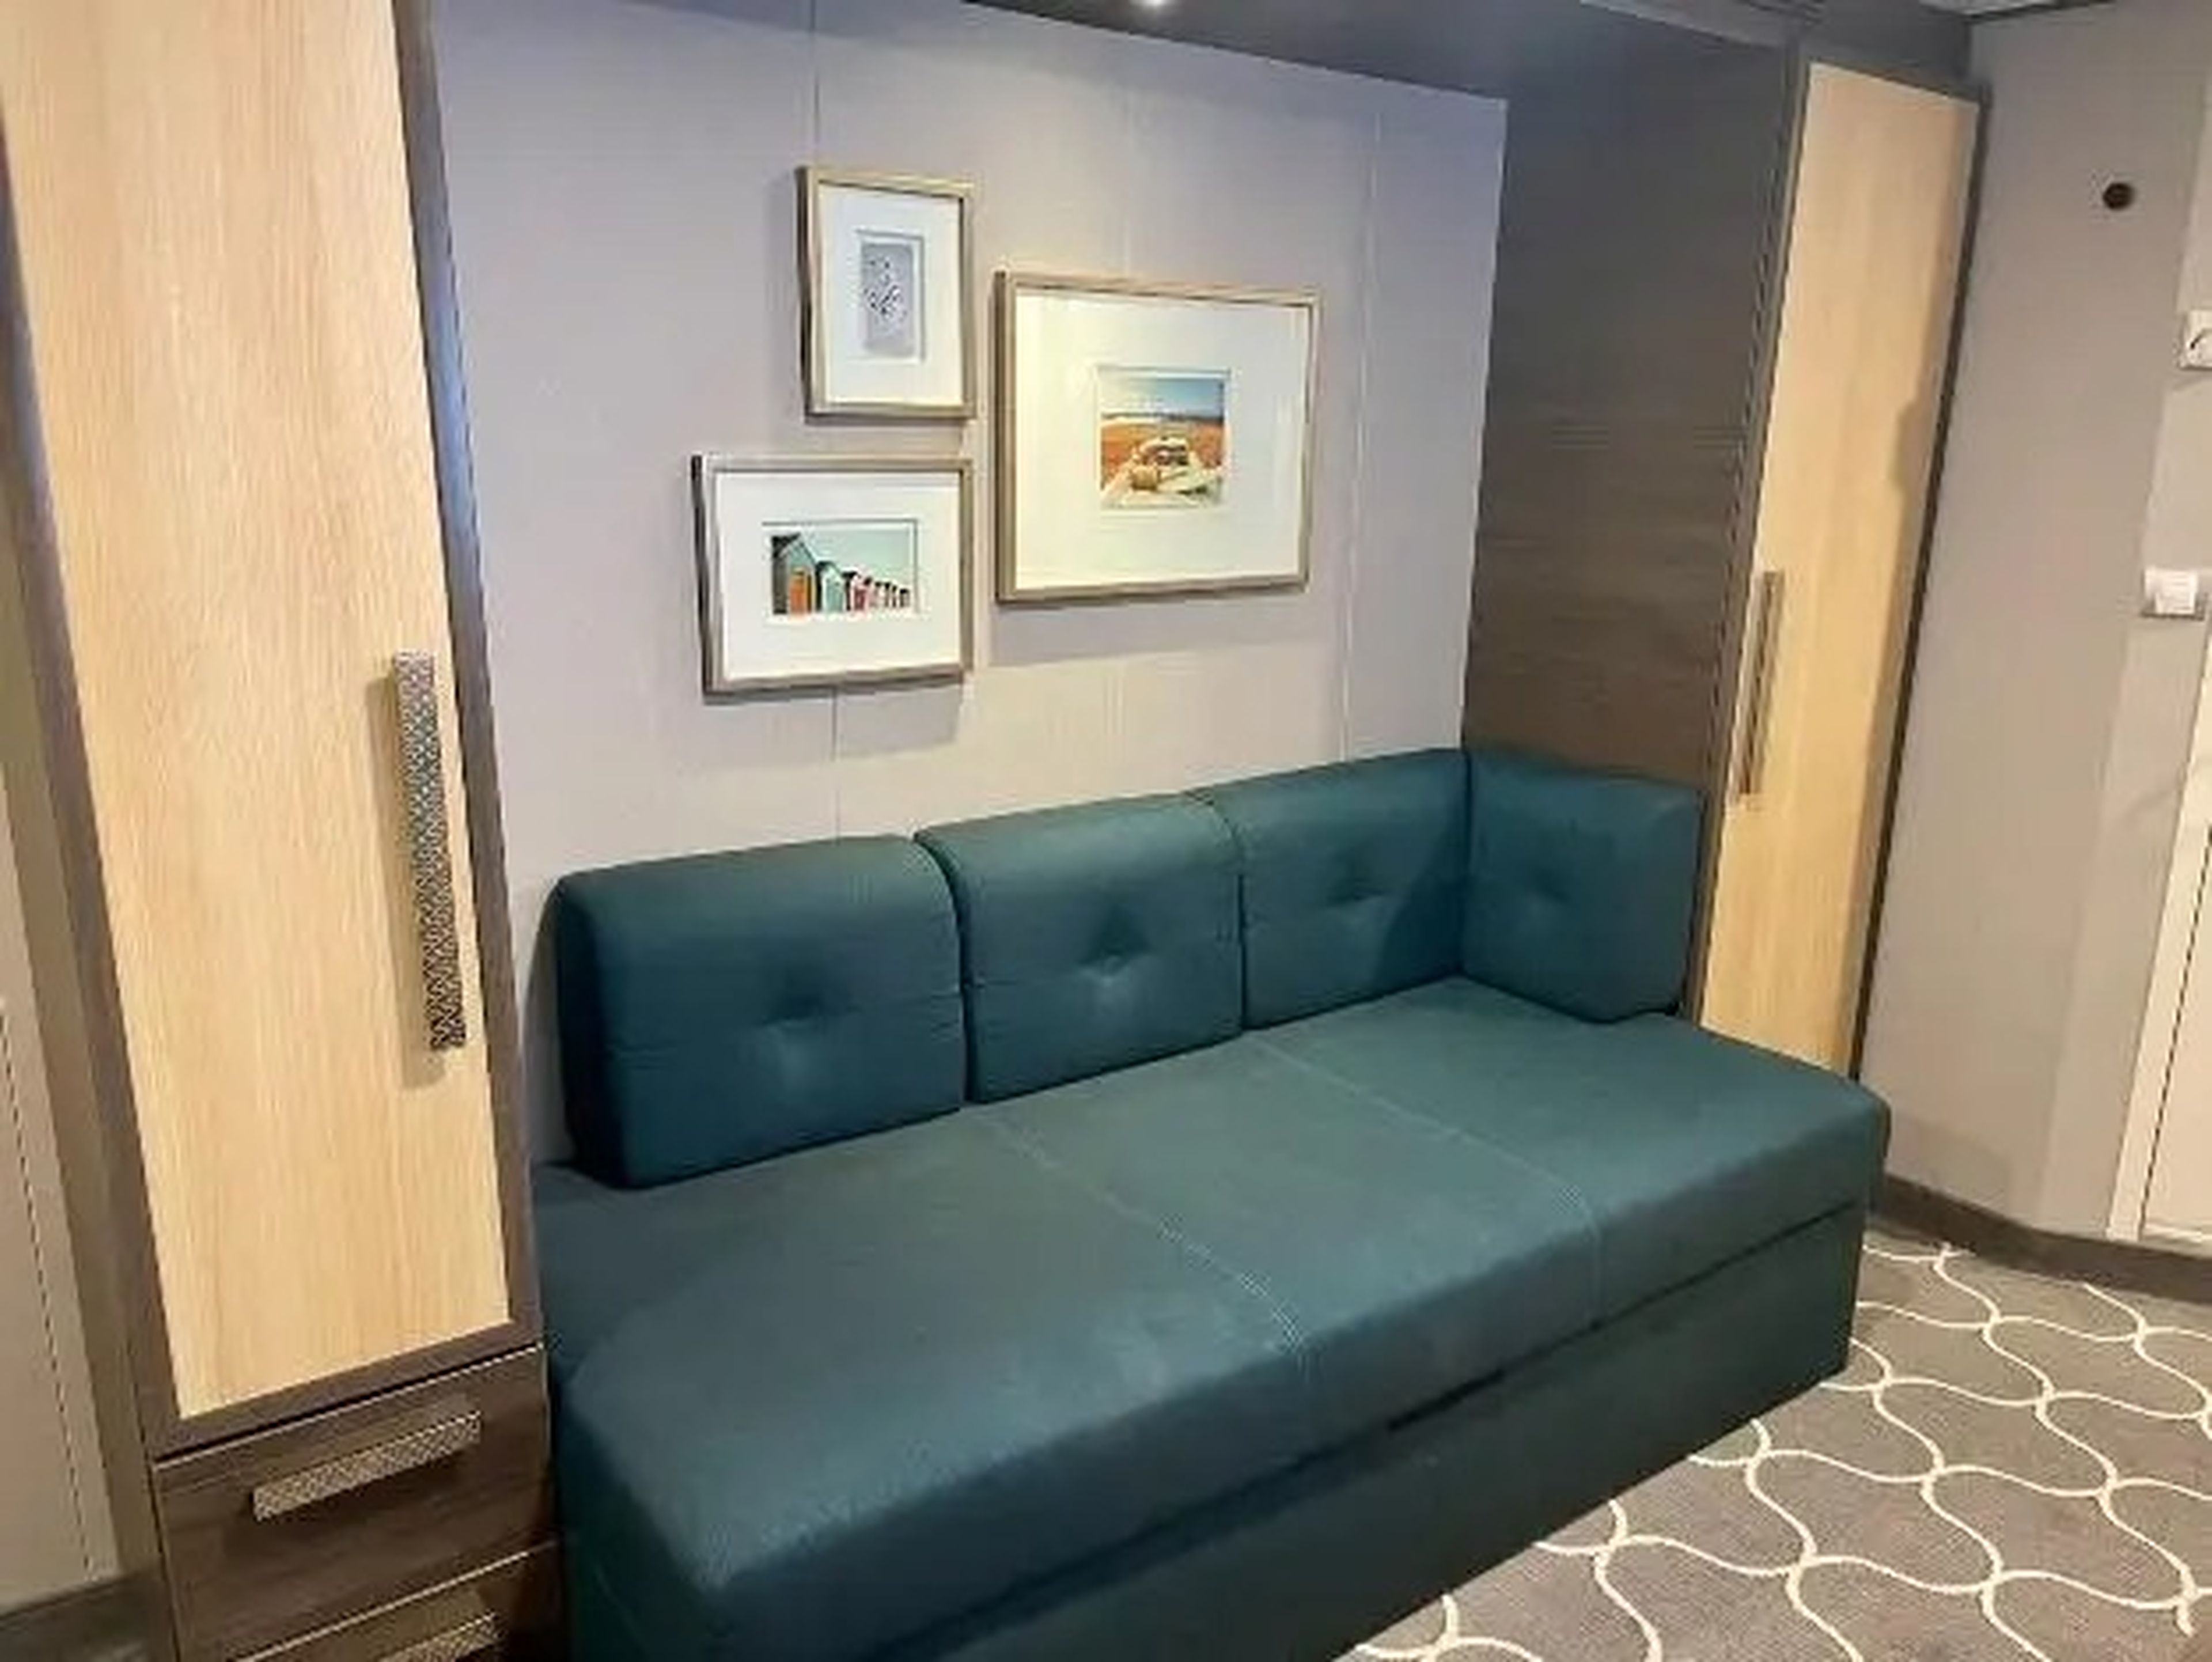 couch in symphony of the seas room with photos hanging on the wall above it